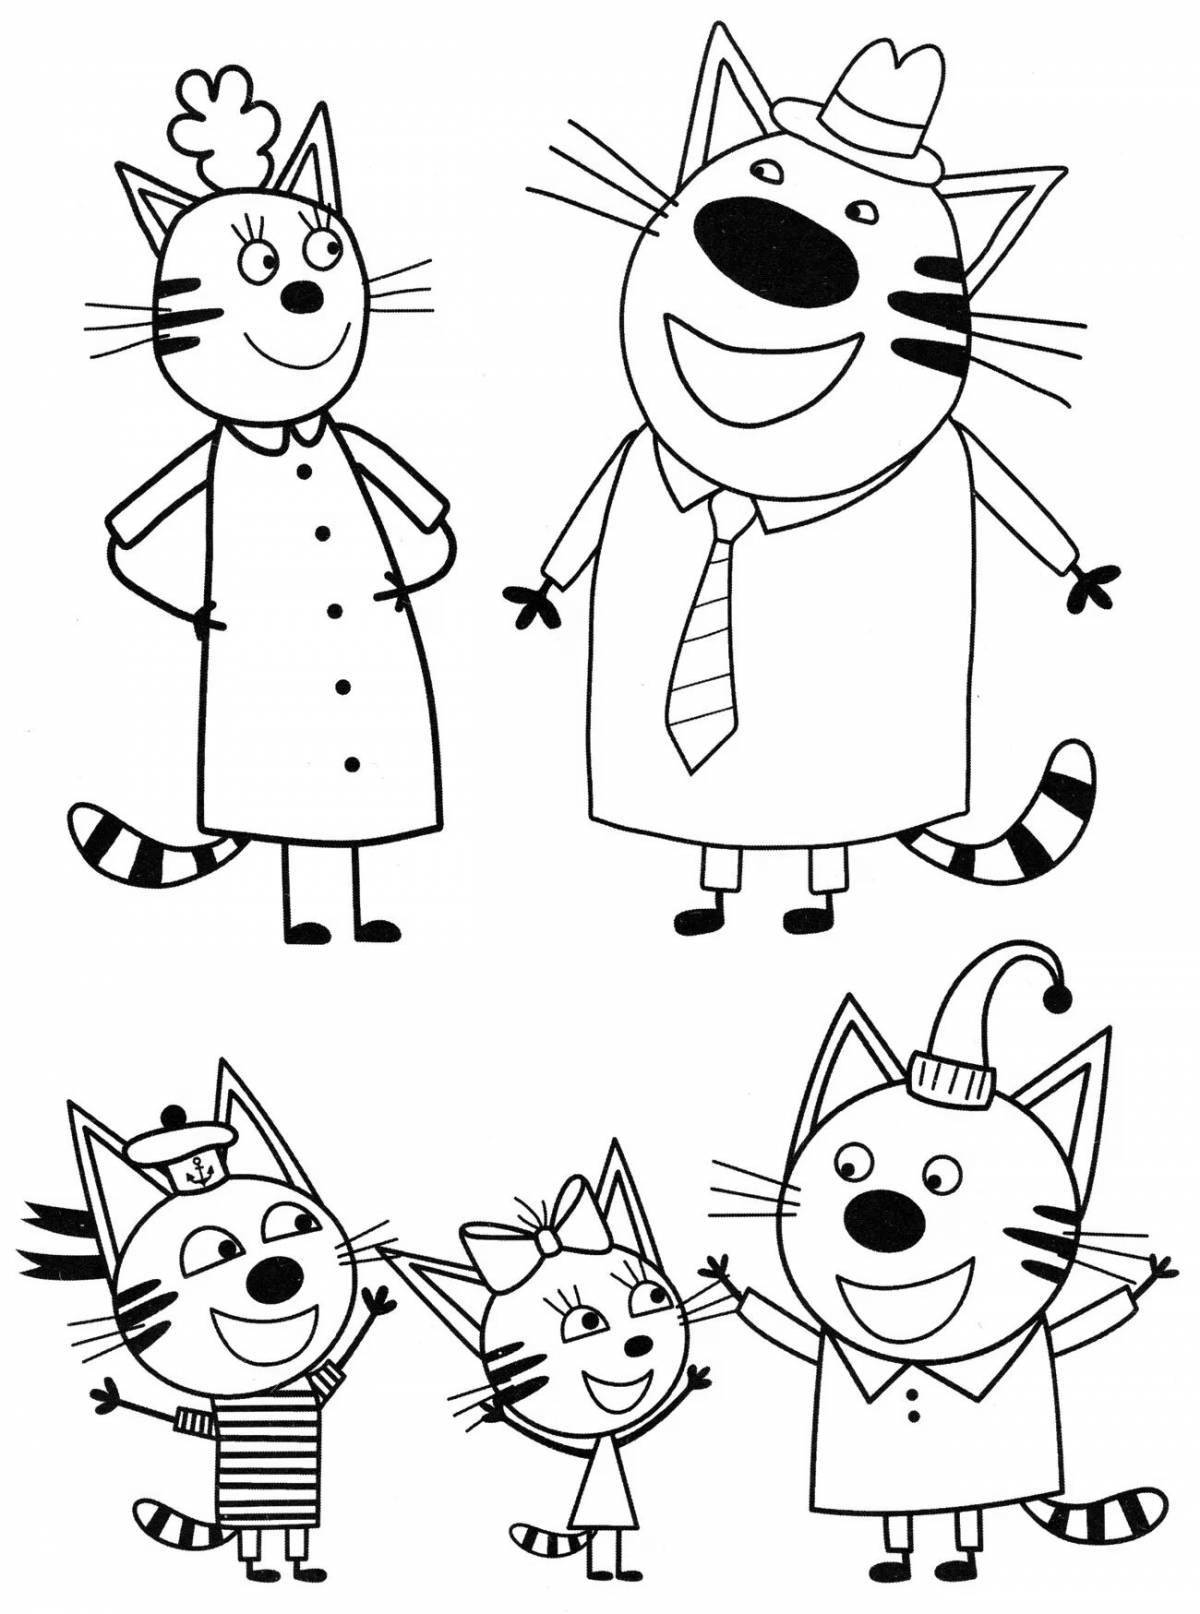 Cute coloring three cats for girls 3 years old